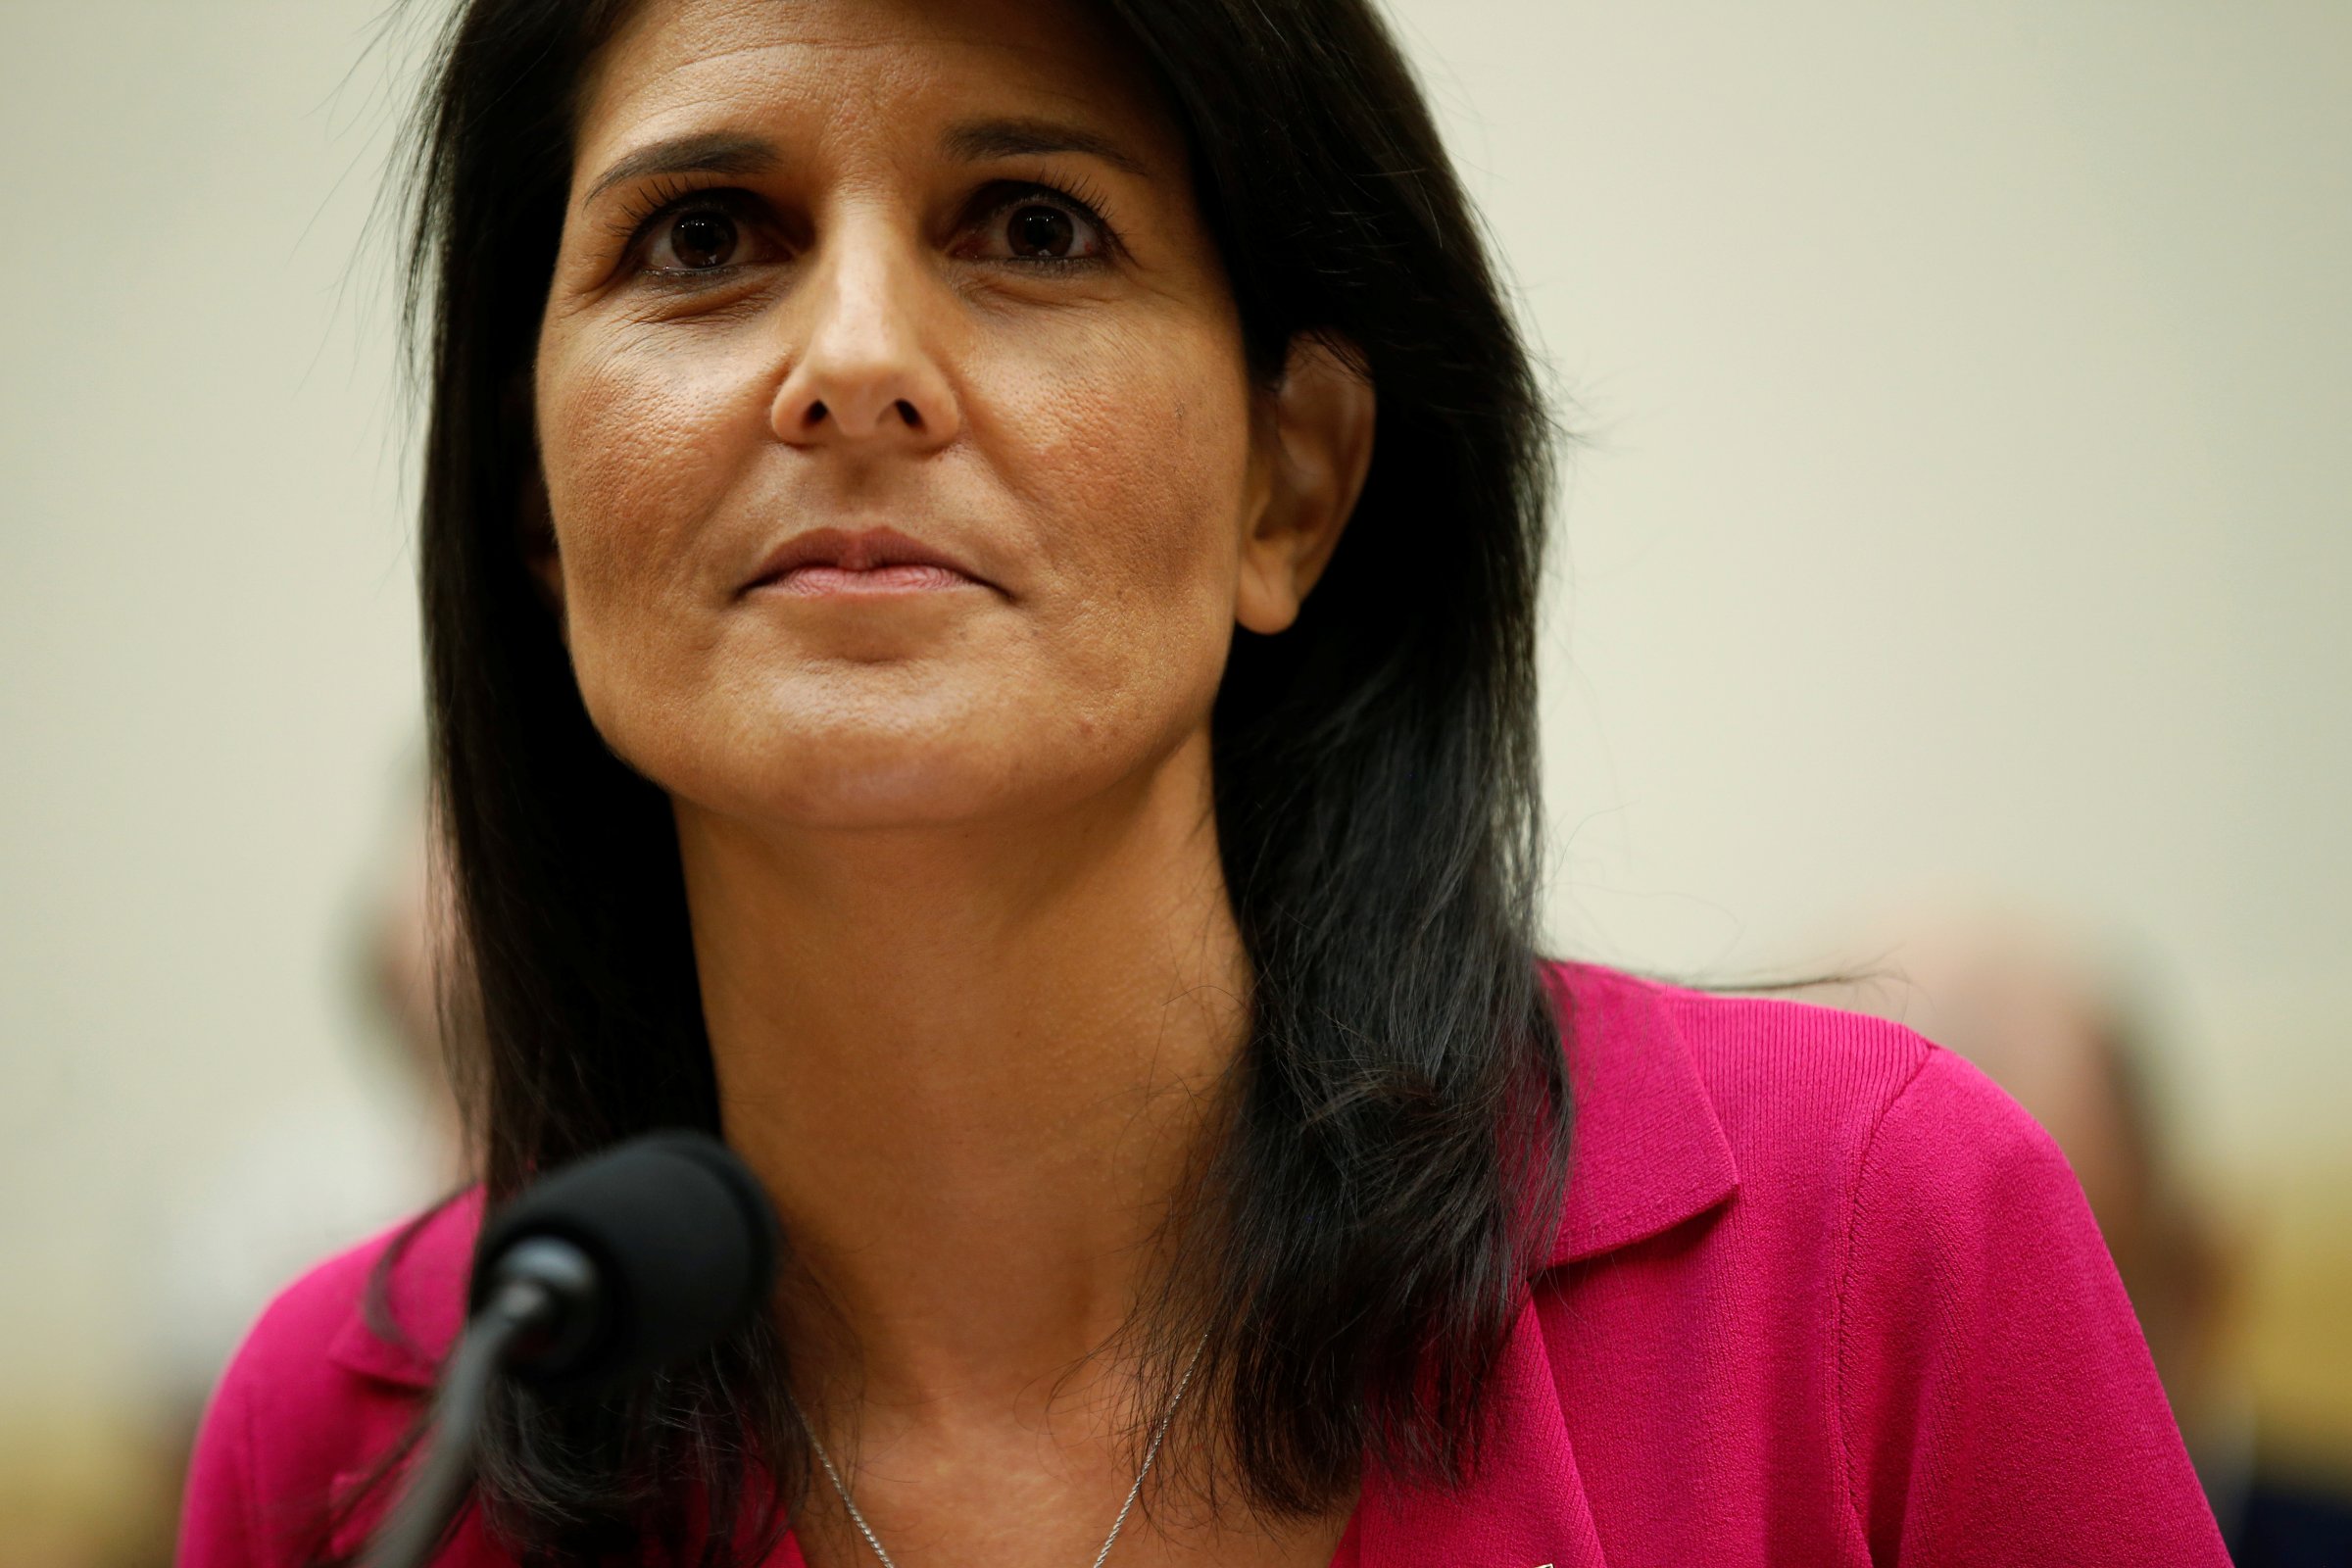 U.S. Ambassador to the United Nations Nikki Haley testifies to the House Foreign Affairs Committee in Washington